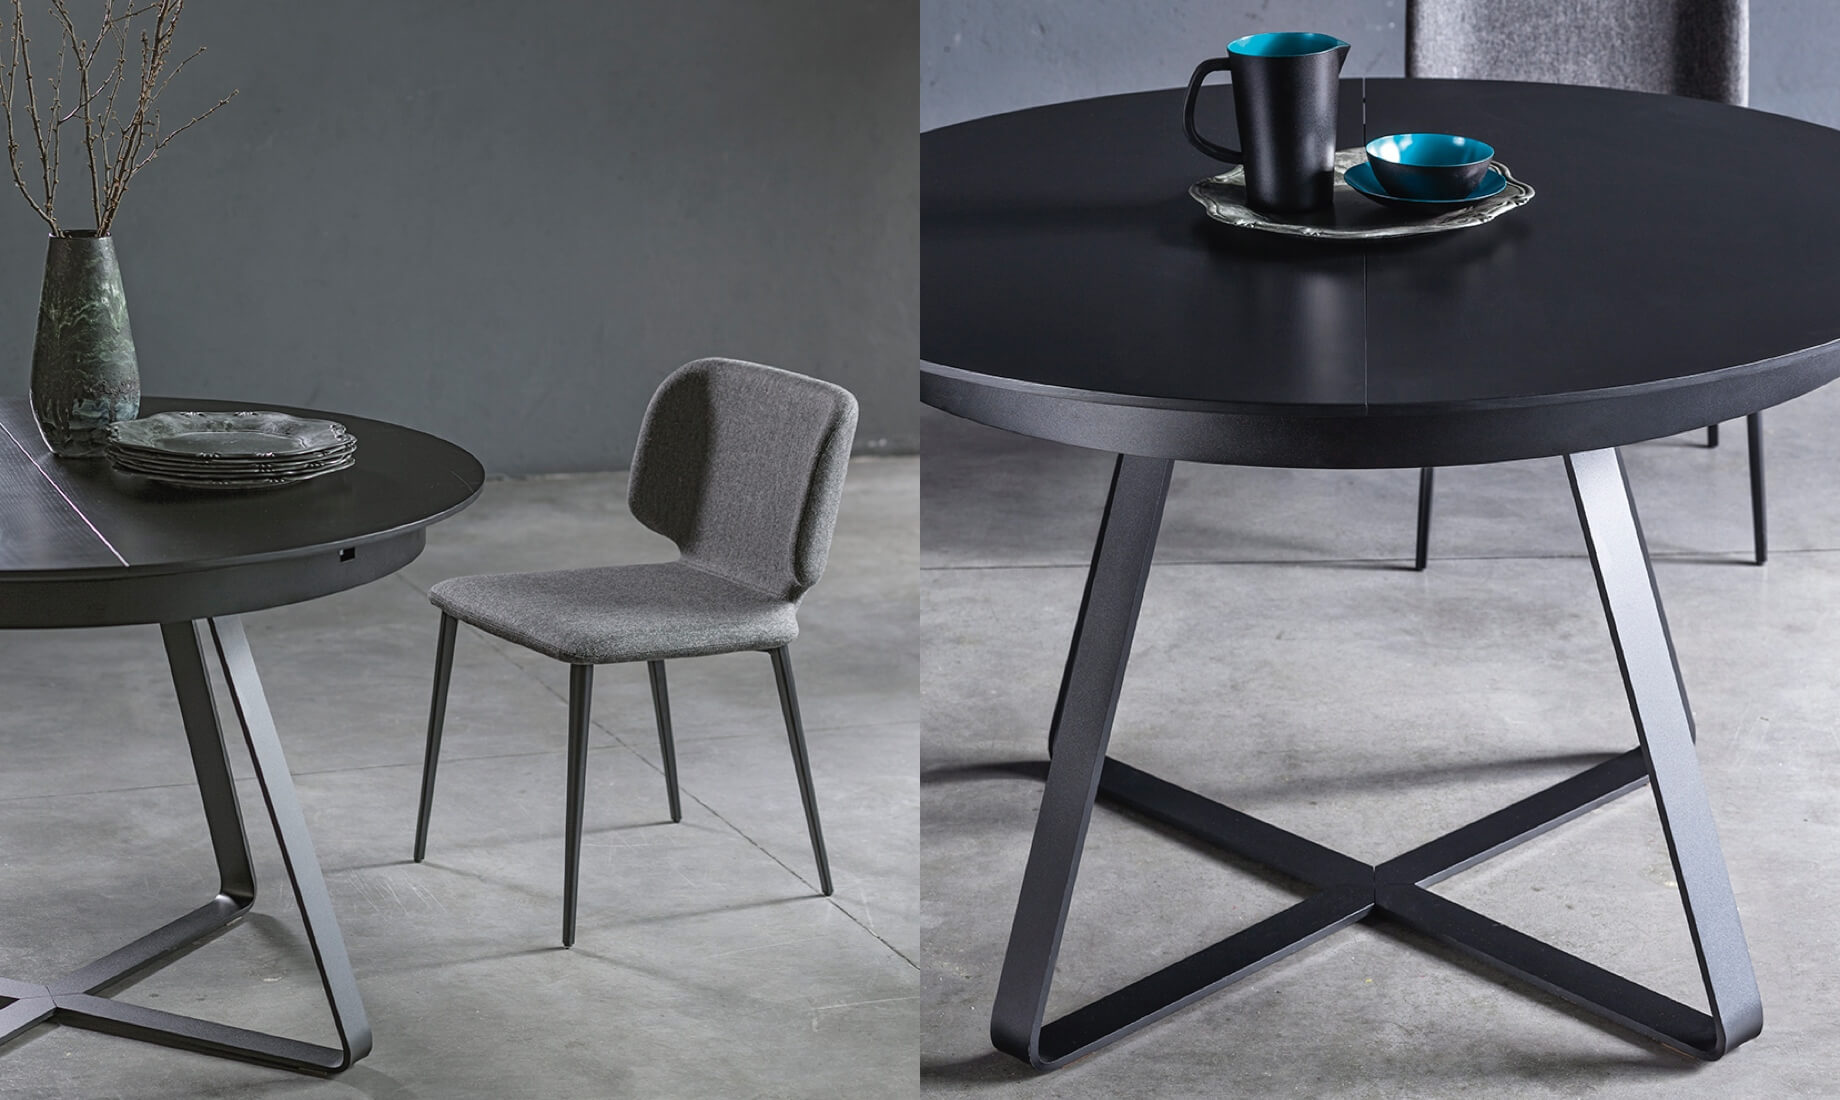 Paul extendable table, with Wrap chair, design Balutto Associati.